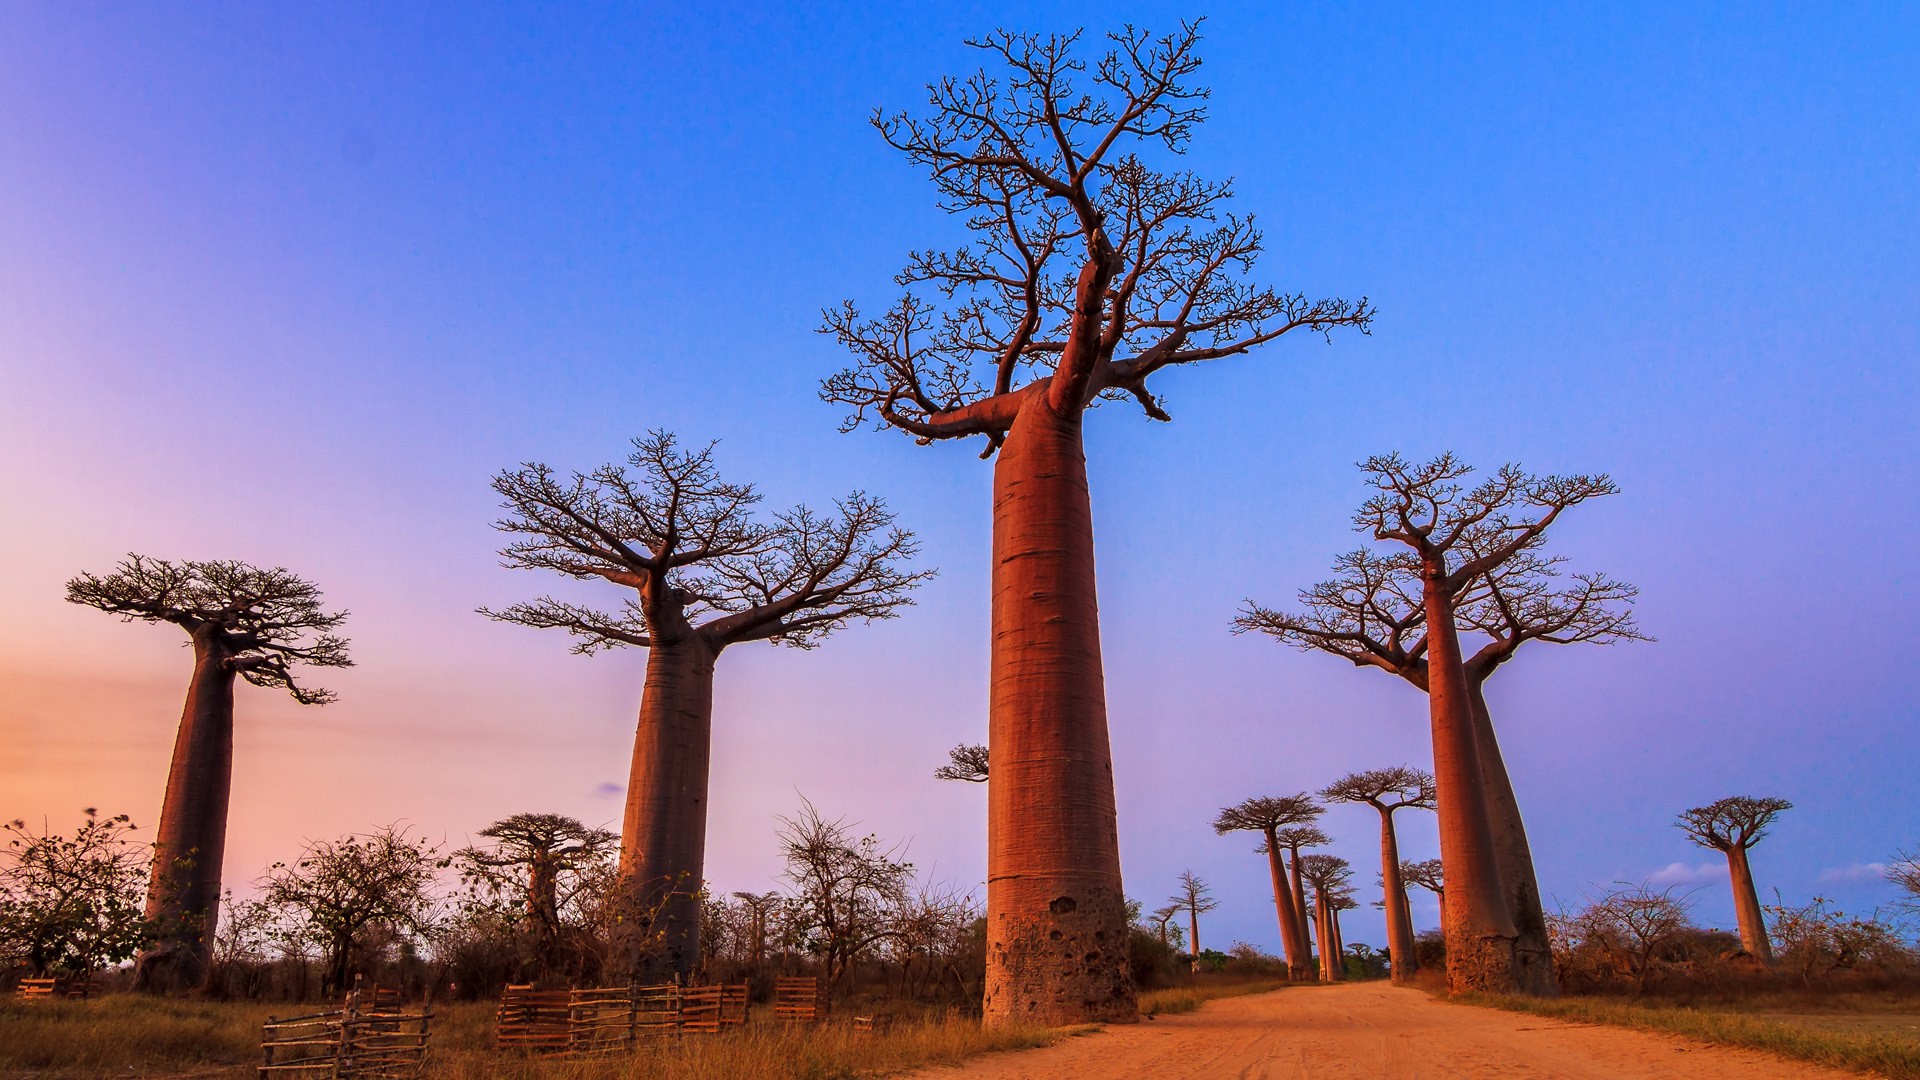 Beautiful Baobab trees after sunset at the avenue of the baobabs, Menabe, Madagascar. Windows 10 Spotlight Image